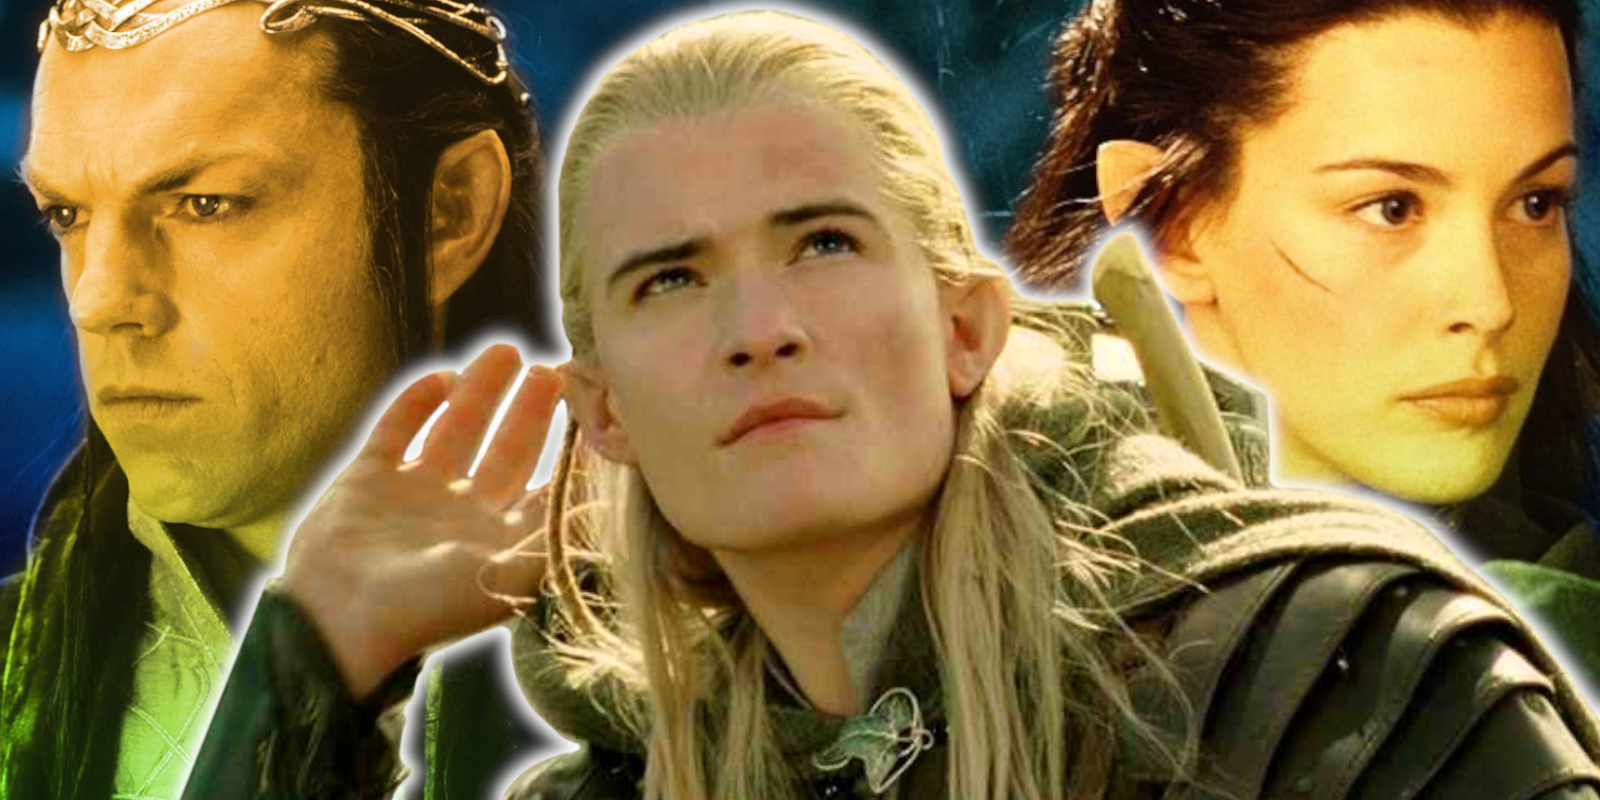 the lord of the rings: why did the elven armies not help at minas tirith or the black gate?